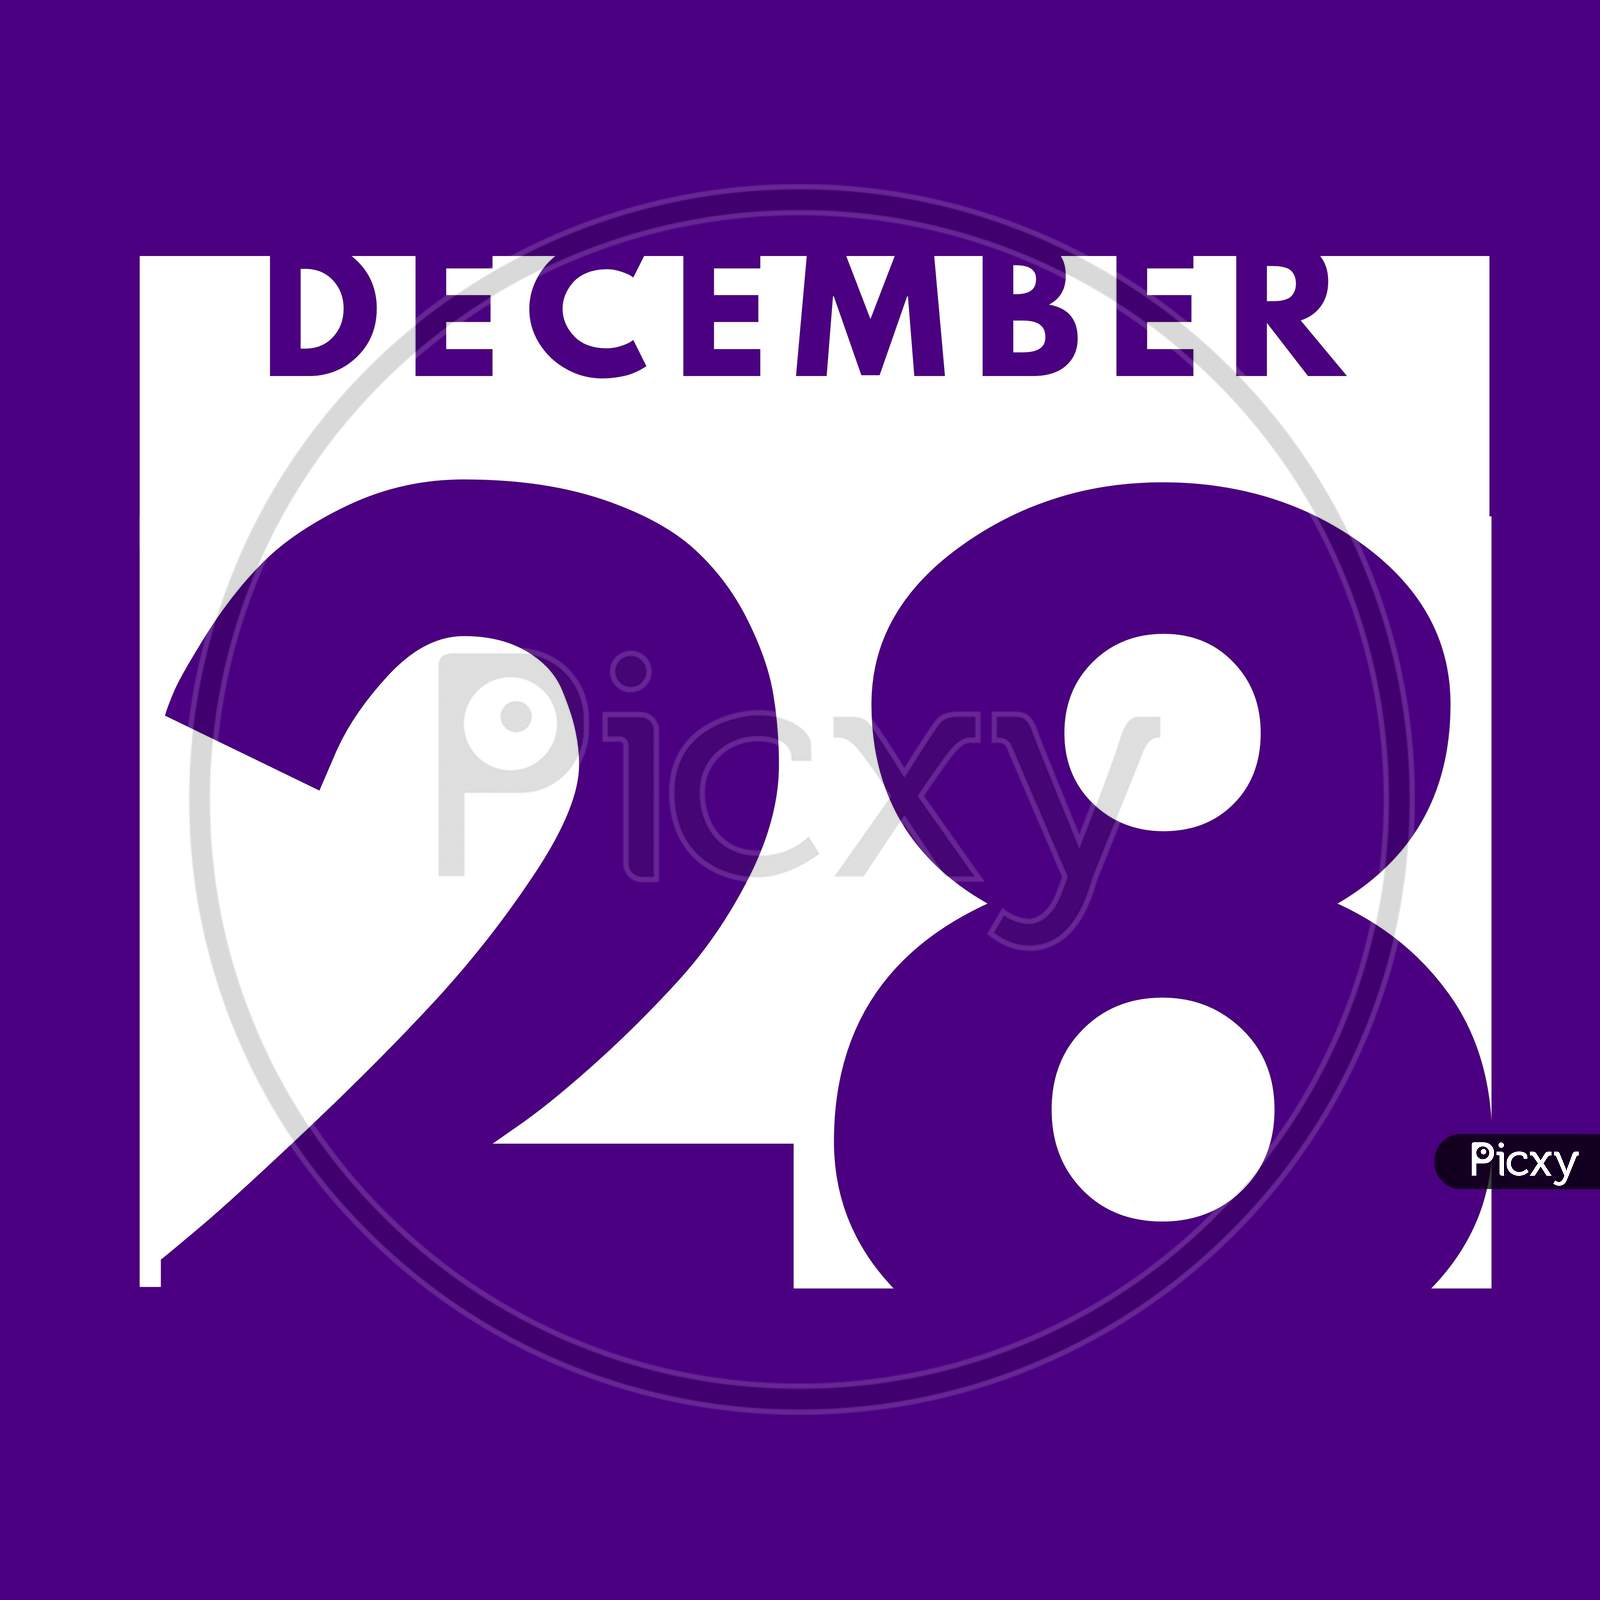 December 28 . Flat Modern Daily Calendar Icon .Date ,Day, Month .Calendar For The Month Of December